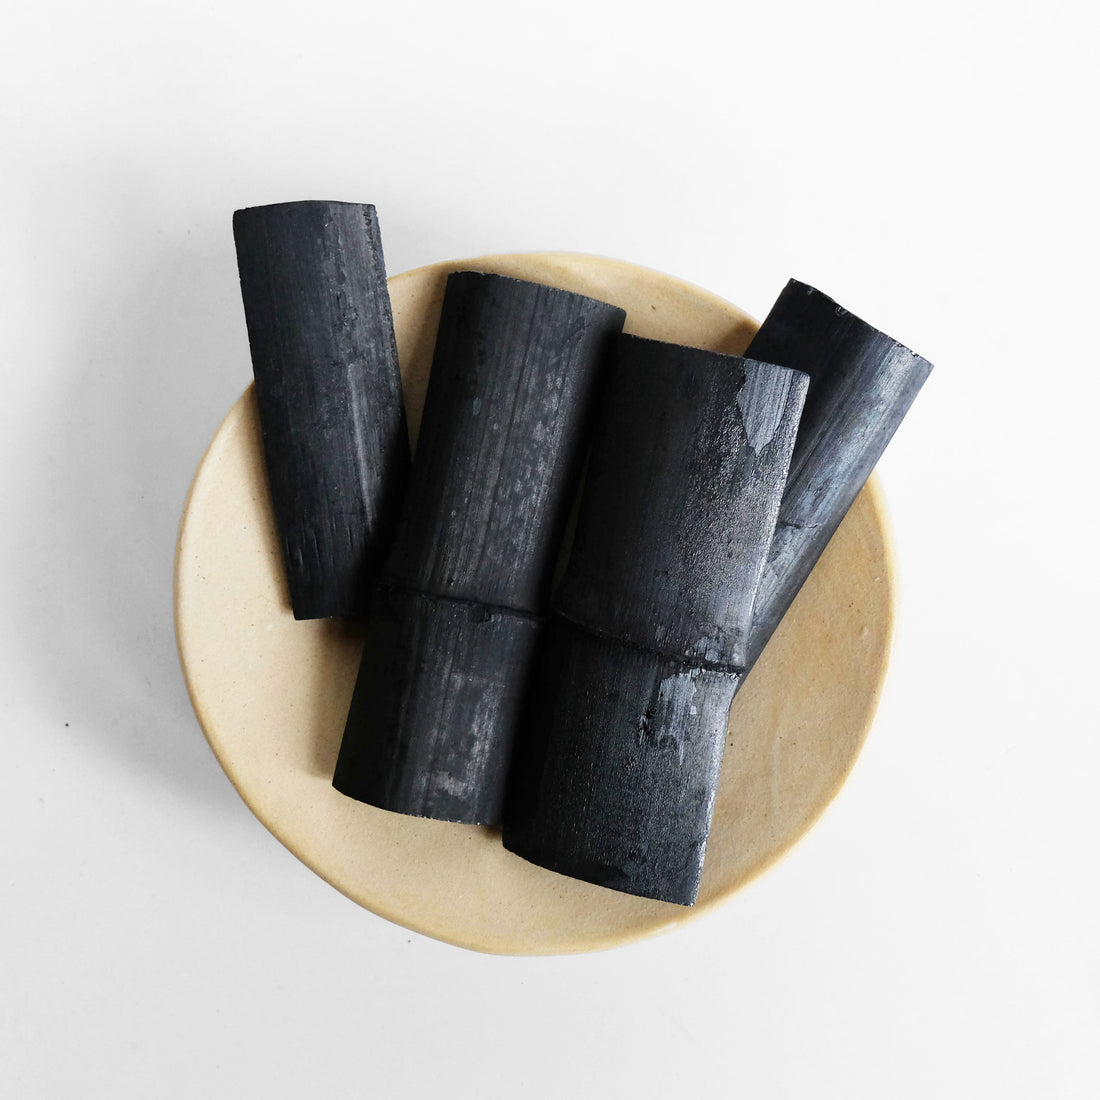 bamboo charcoal water filter sticks